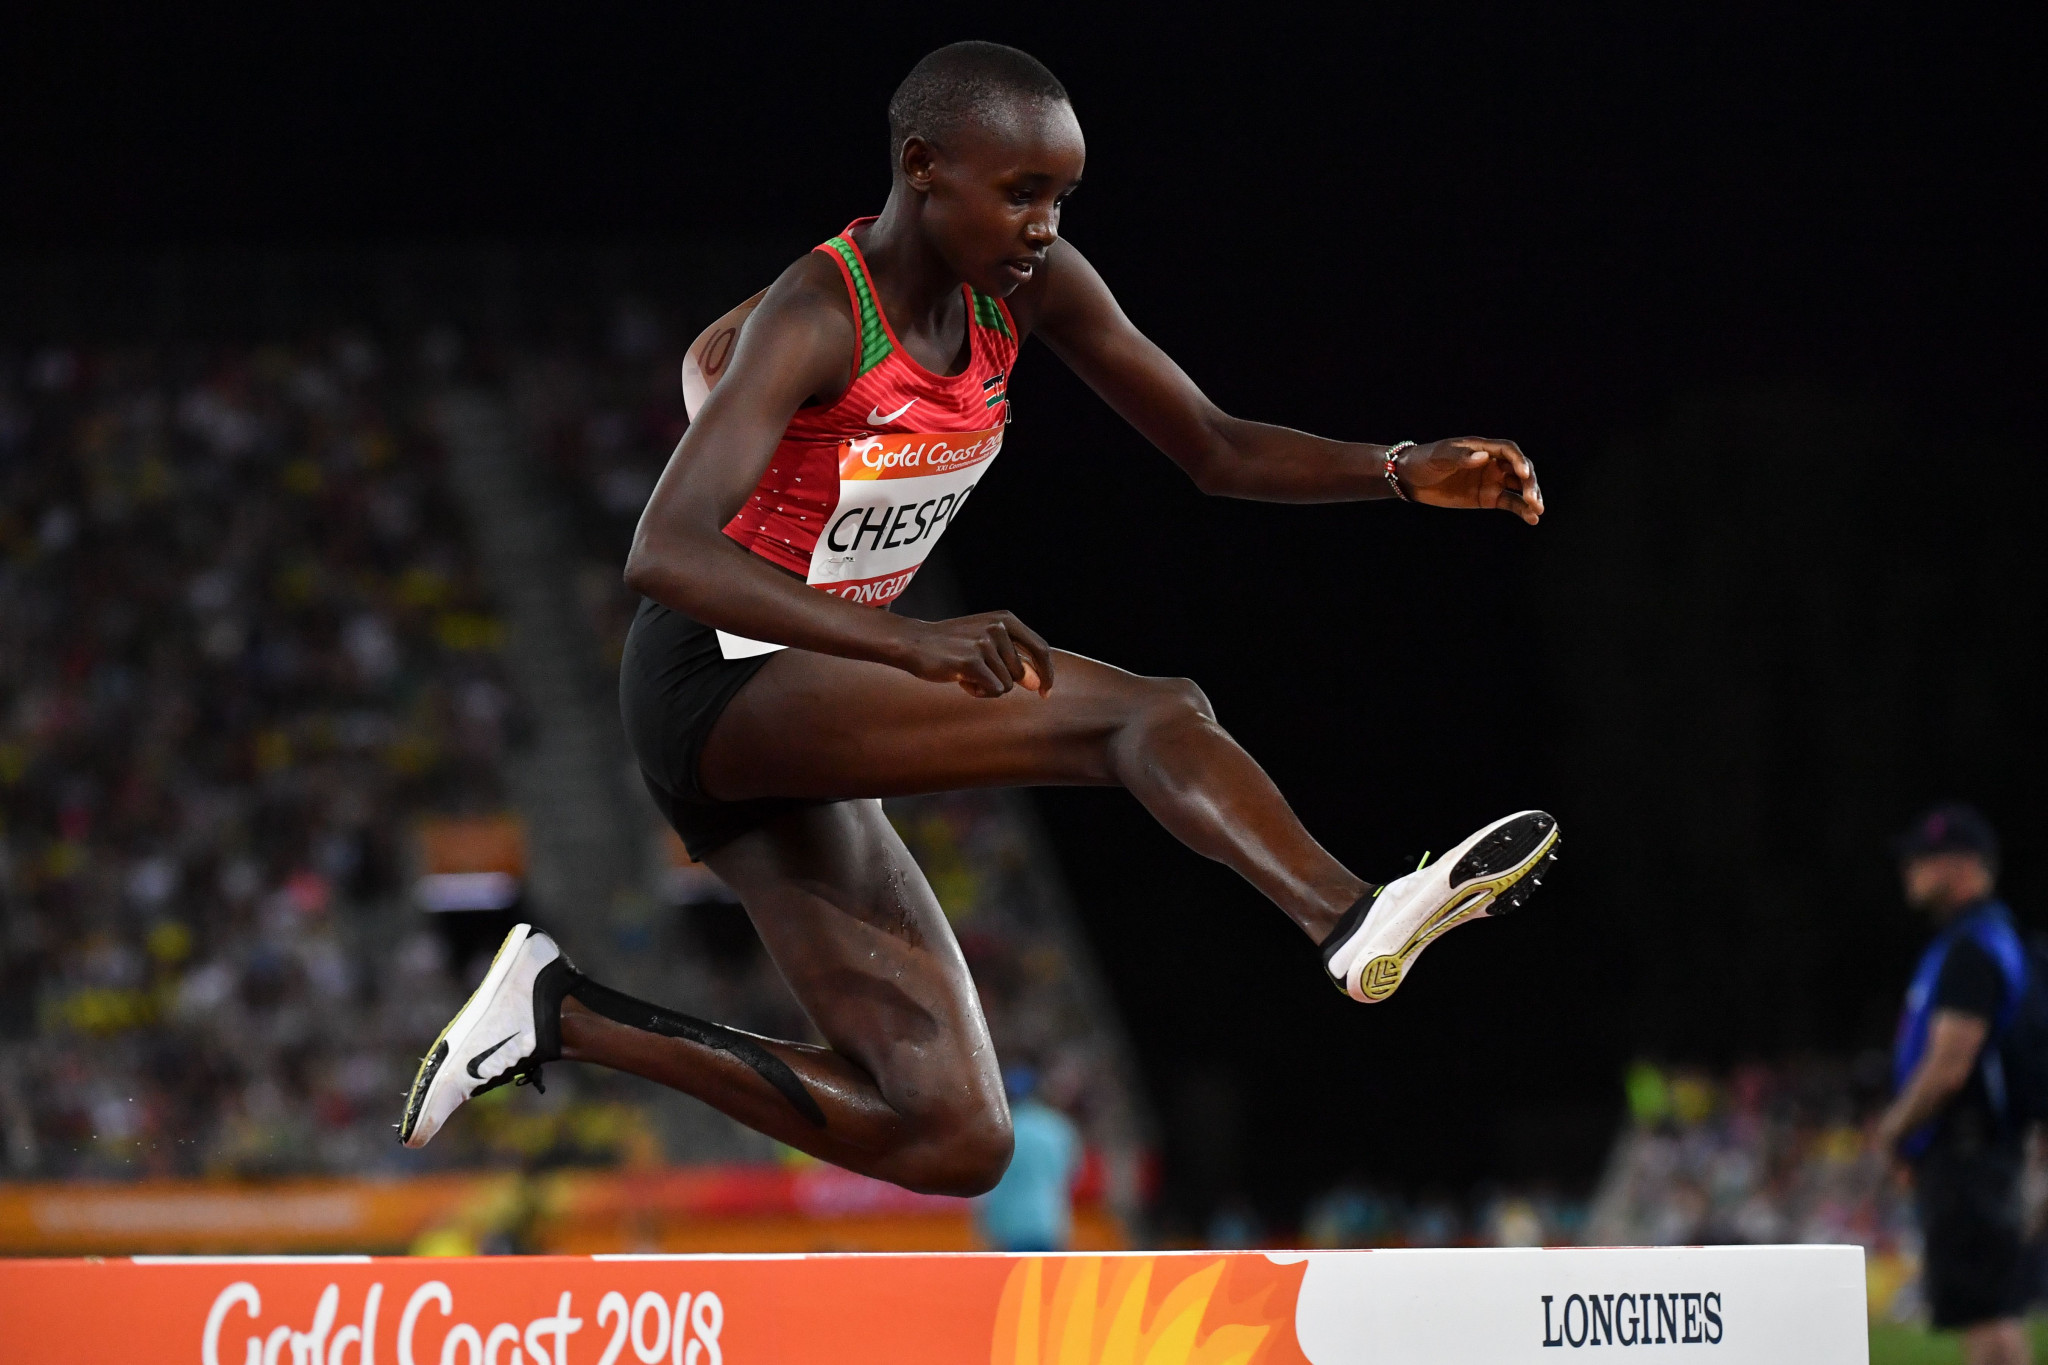 The performances of Celliphine Chespol, including winning a Commonwealth Games silver medal in the 3,000 metres steeplechase, saw her nominated for the female IAAF Rising Star Award @Getty Images